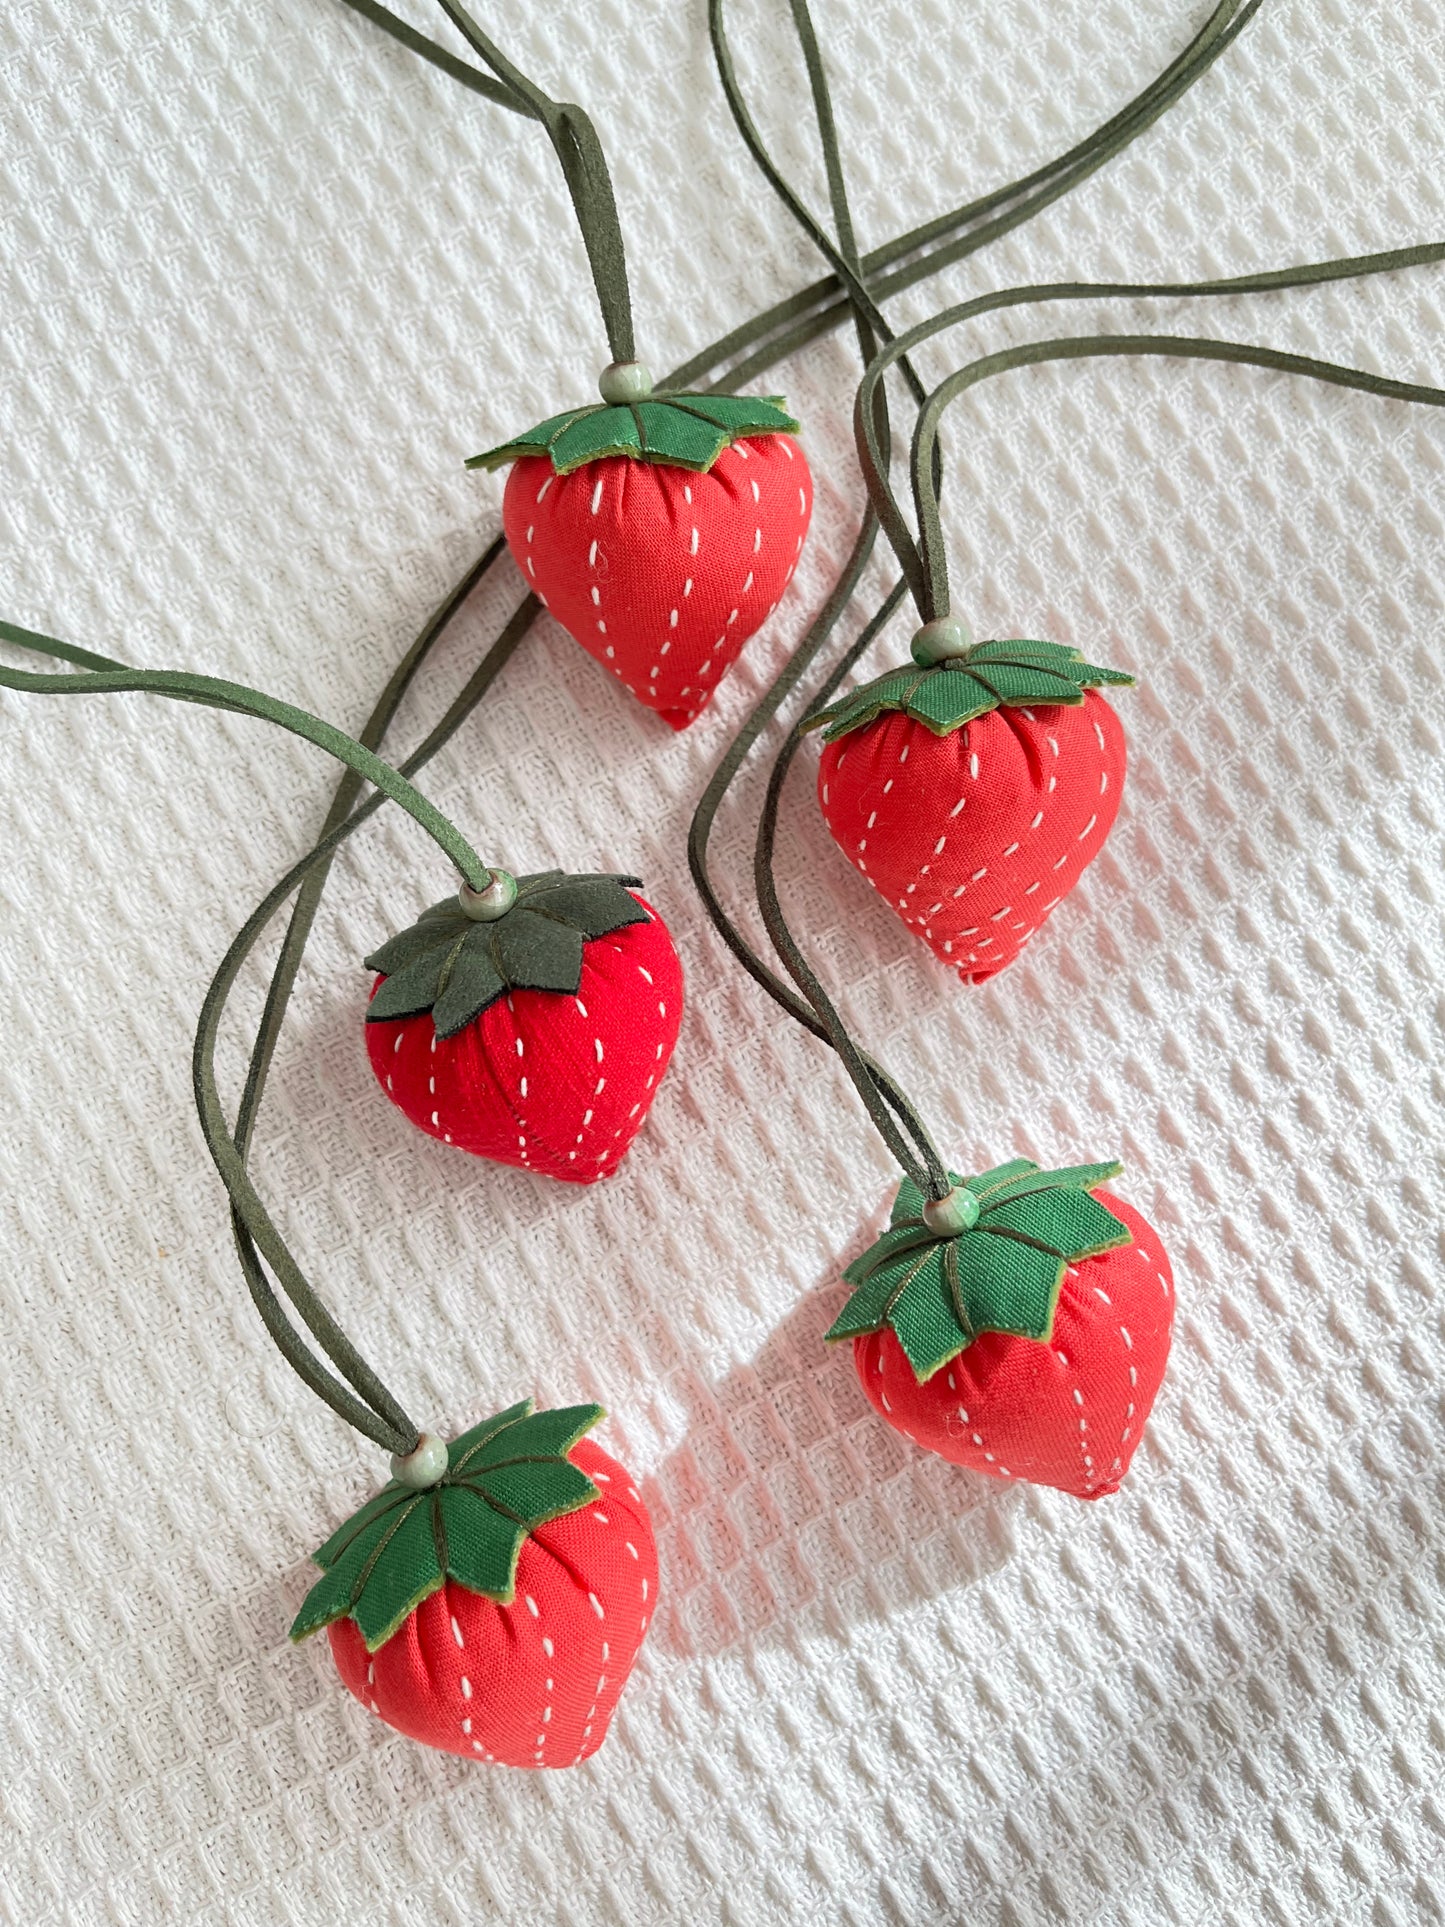 Hand-sewing strawberry shaped sachet with lavender scent. Adjustable length strawberry fabric necklace / bag ornament / car sachet.